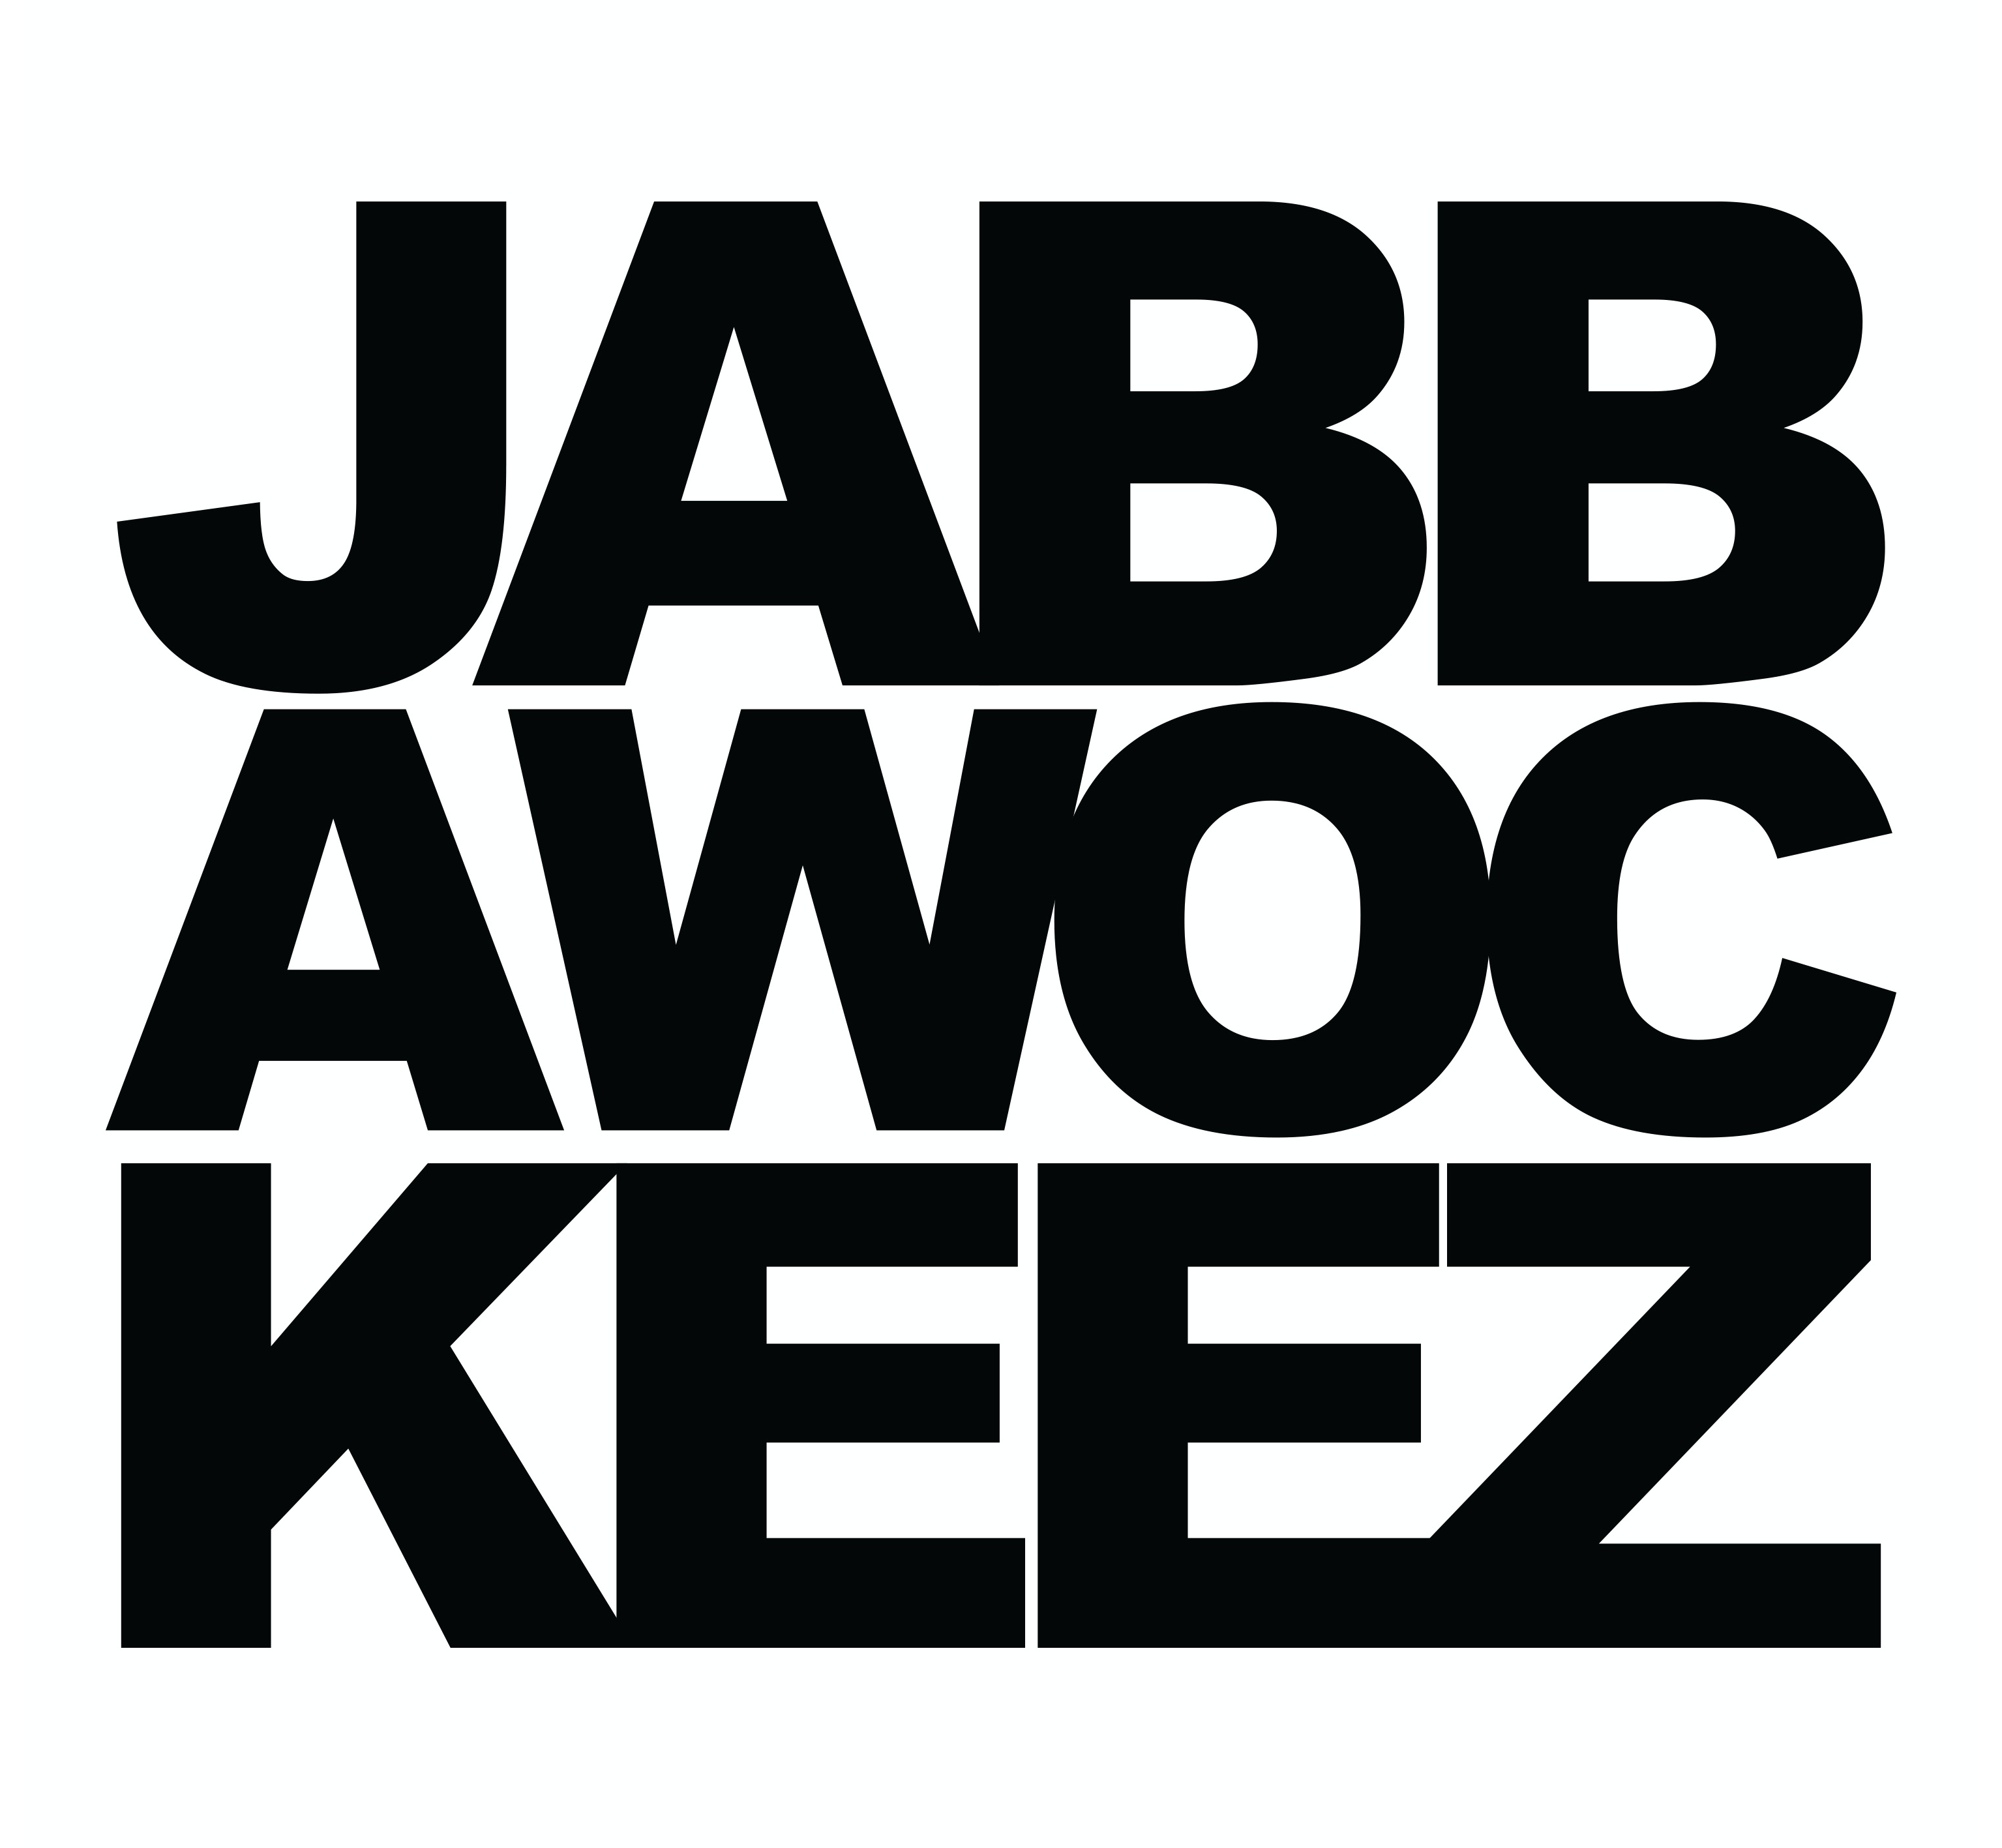 Jabbawockeez Background Images HD Pictures and Wallpaper For Free Download   Pngtree